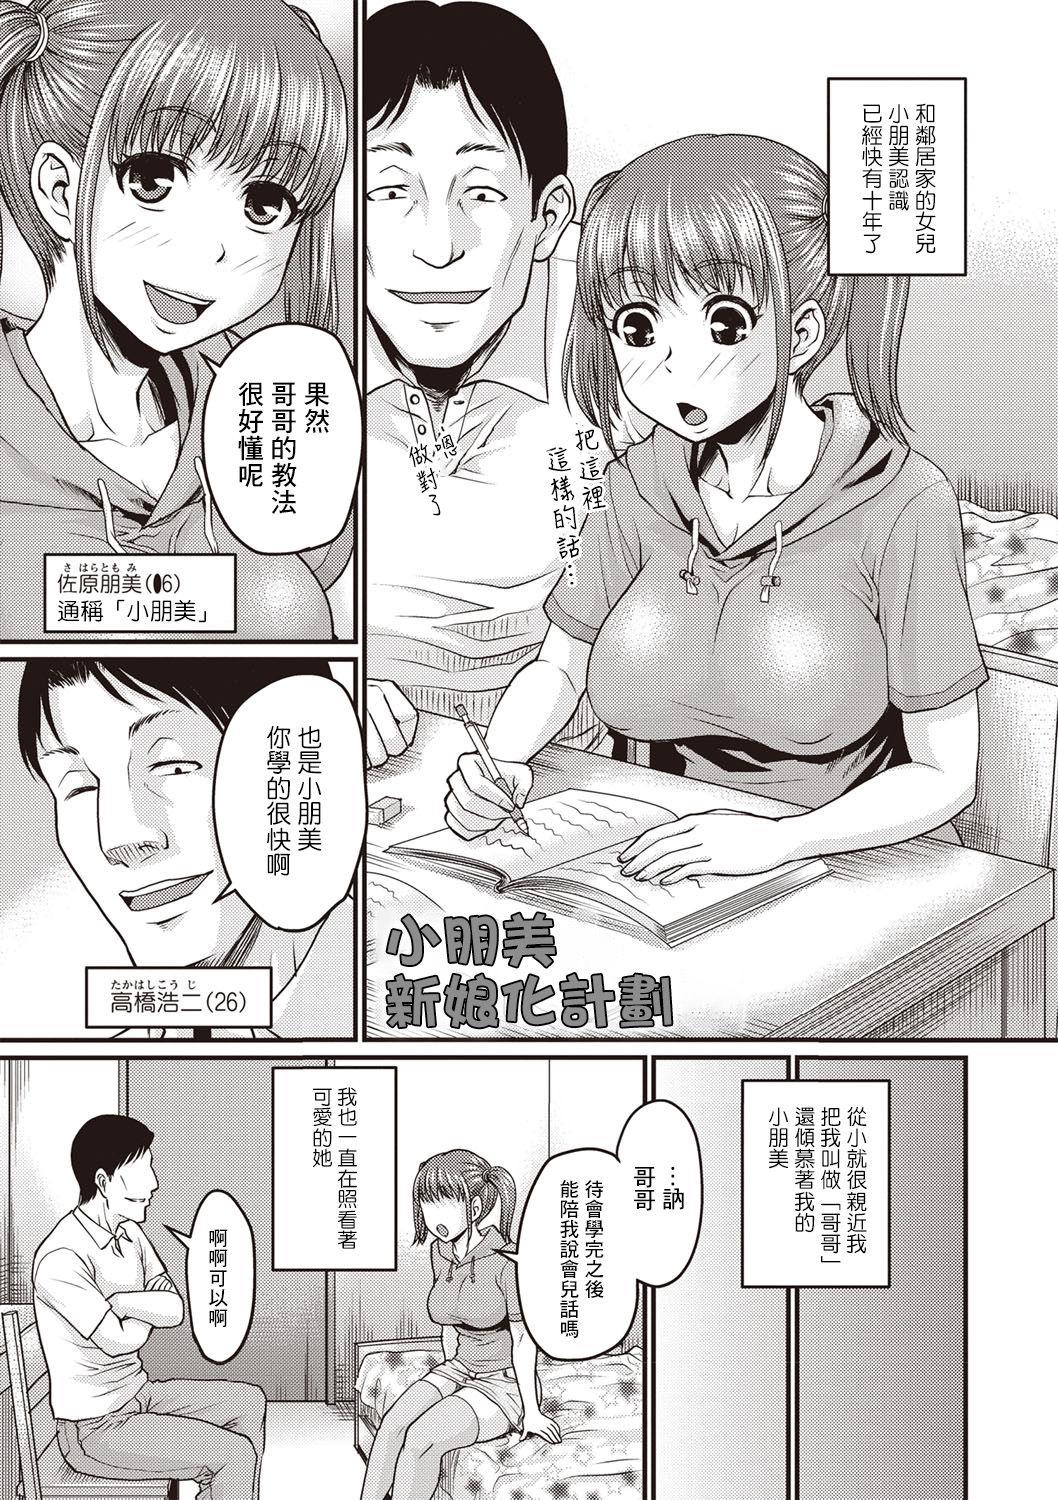 Stripping トモちゃんお嫁さん化計画 Milfs - Page 2